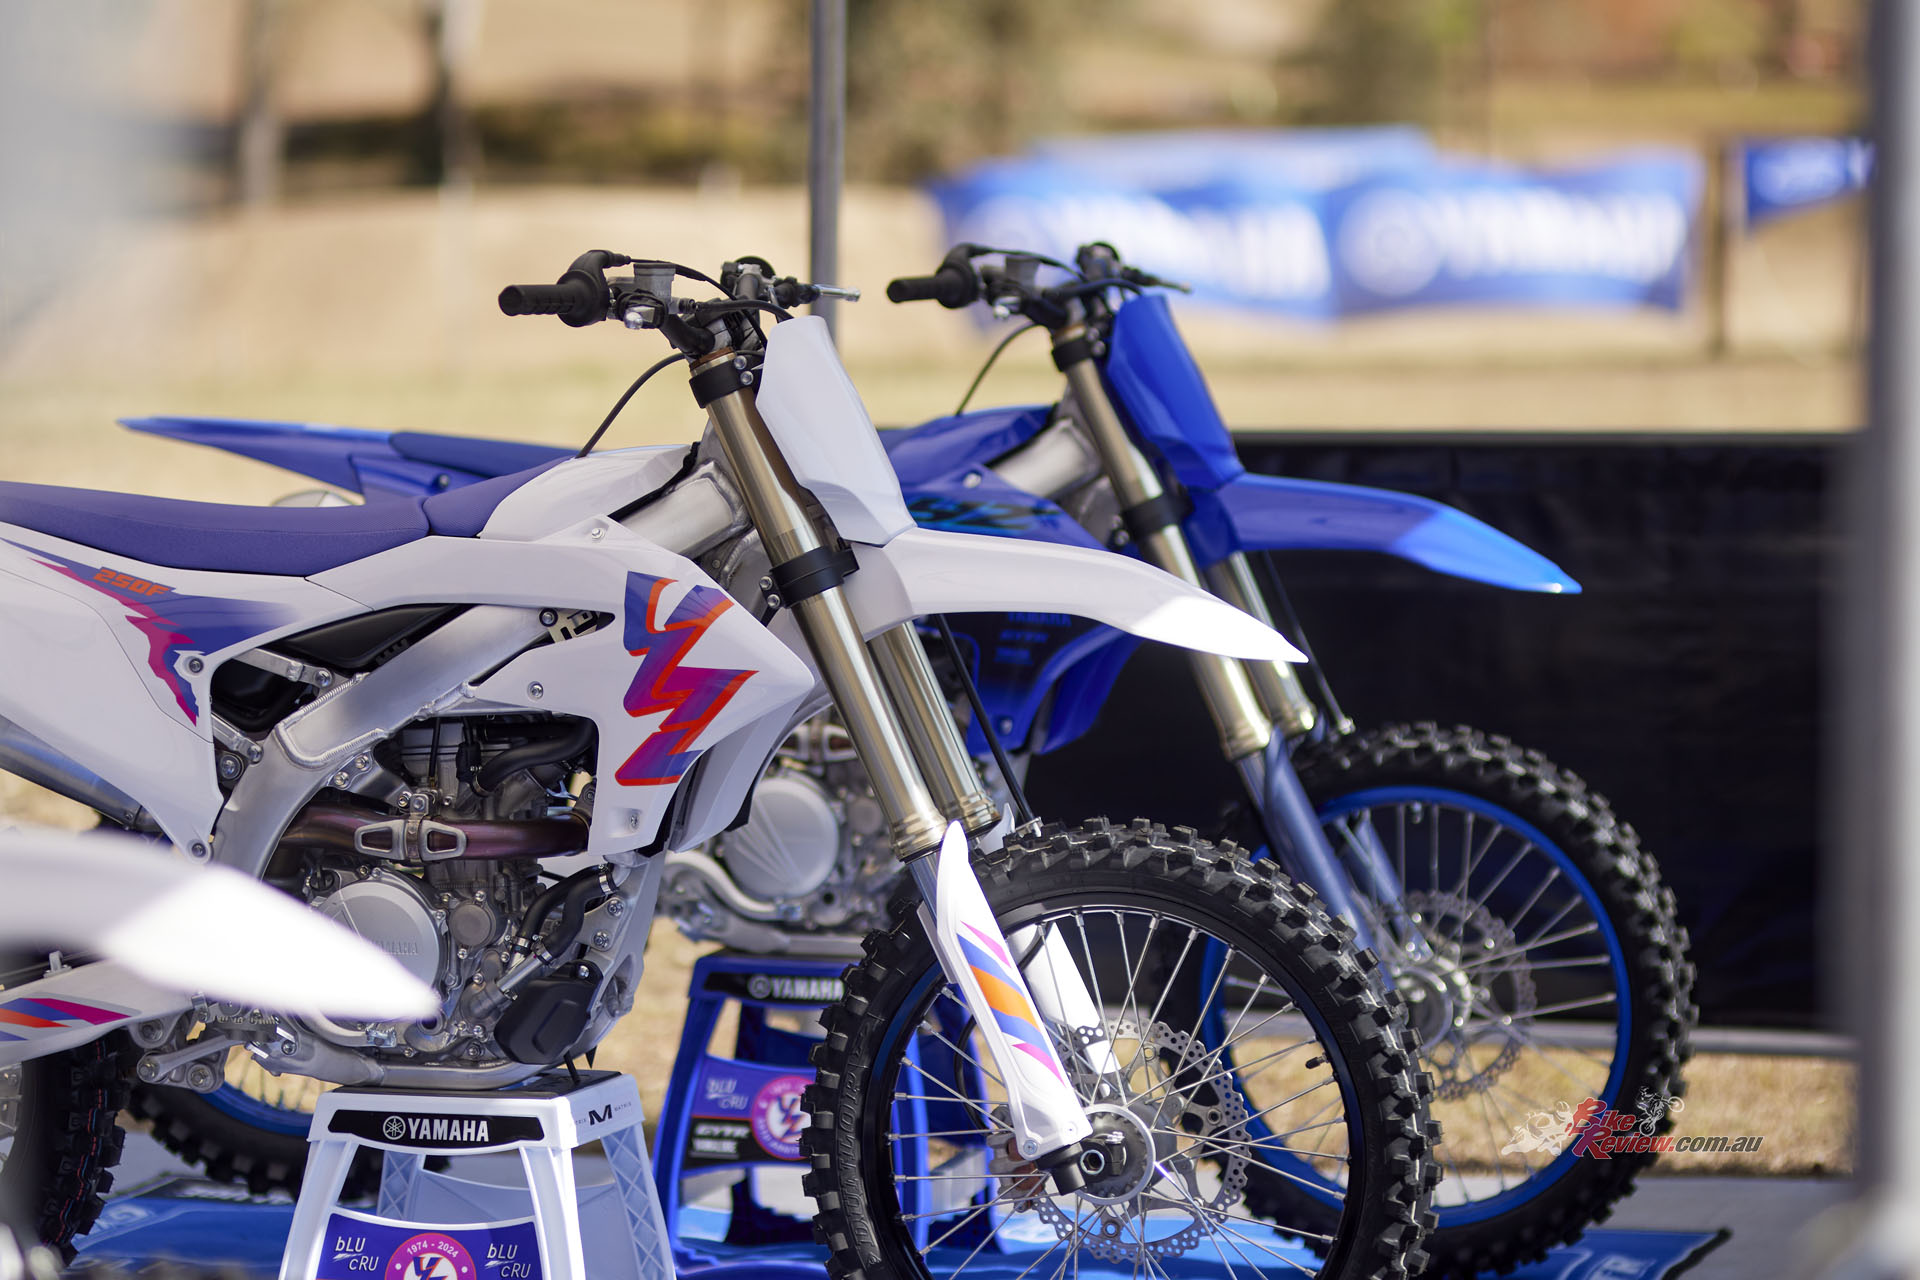 Pricing starts at $13,949 ride away for the standard colour YZ250F and $14,249 for the YZ250FSP 50th anniversary livery.